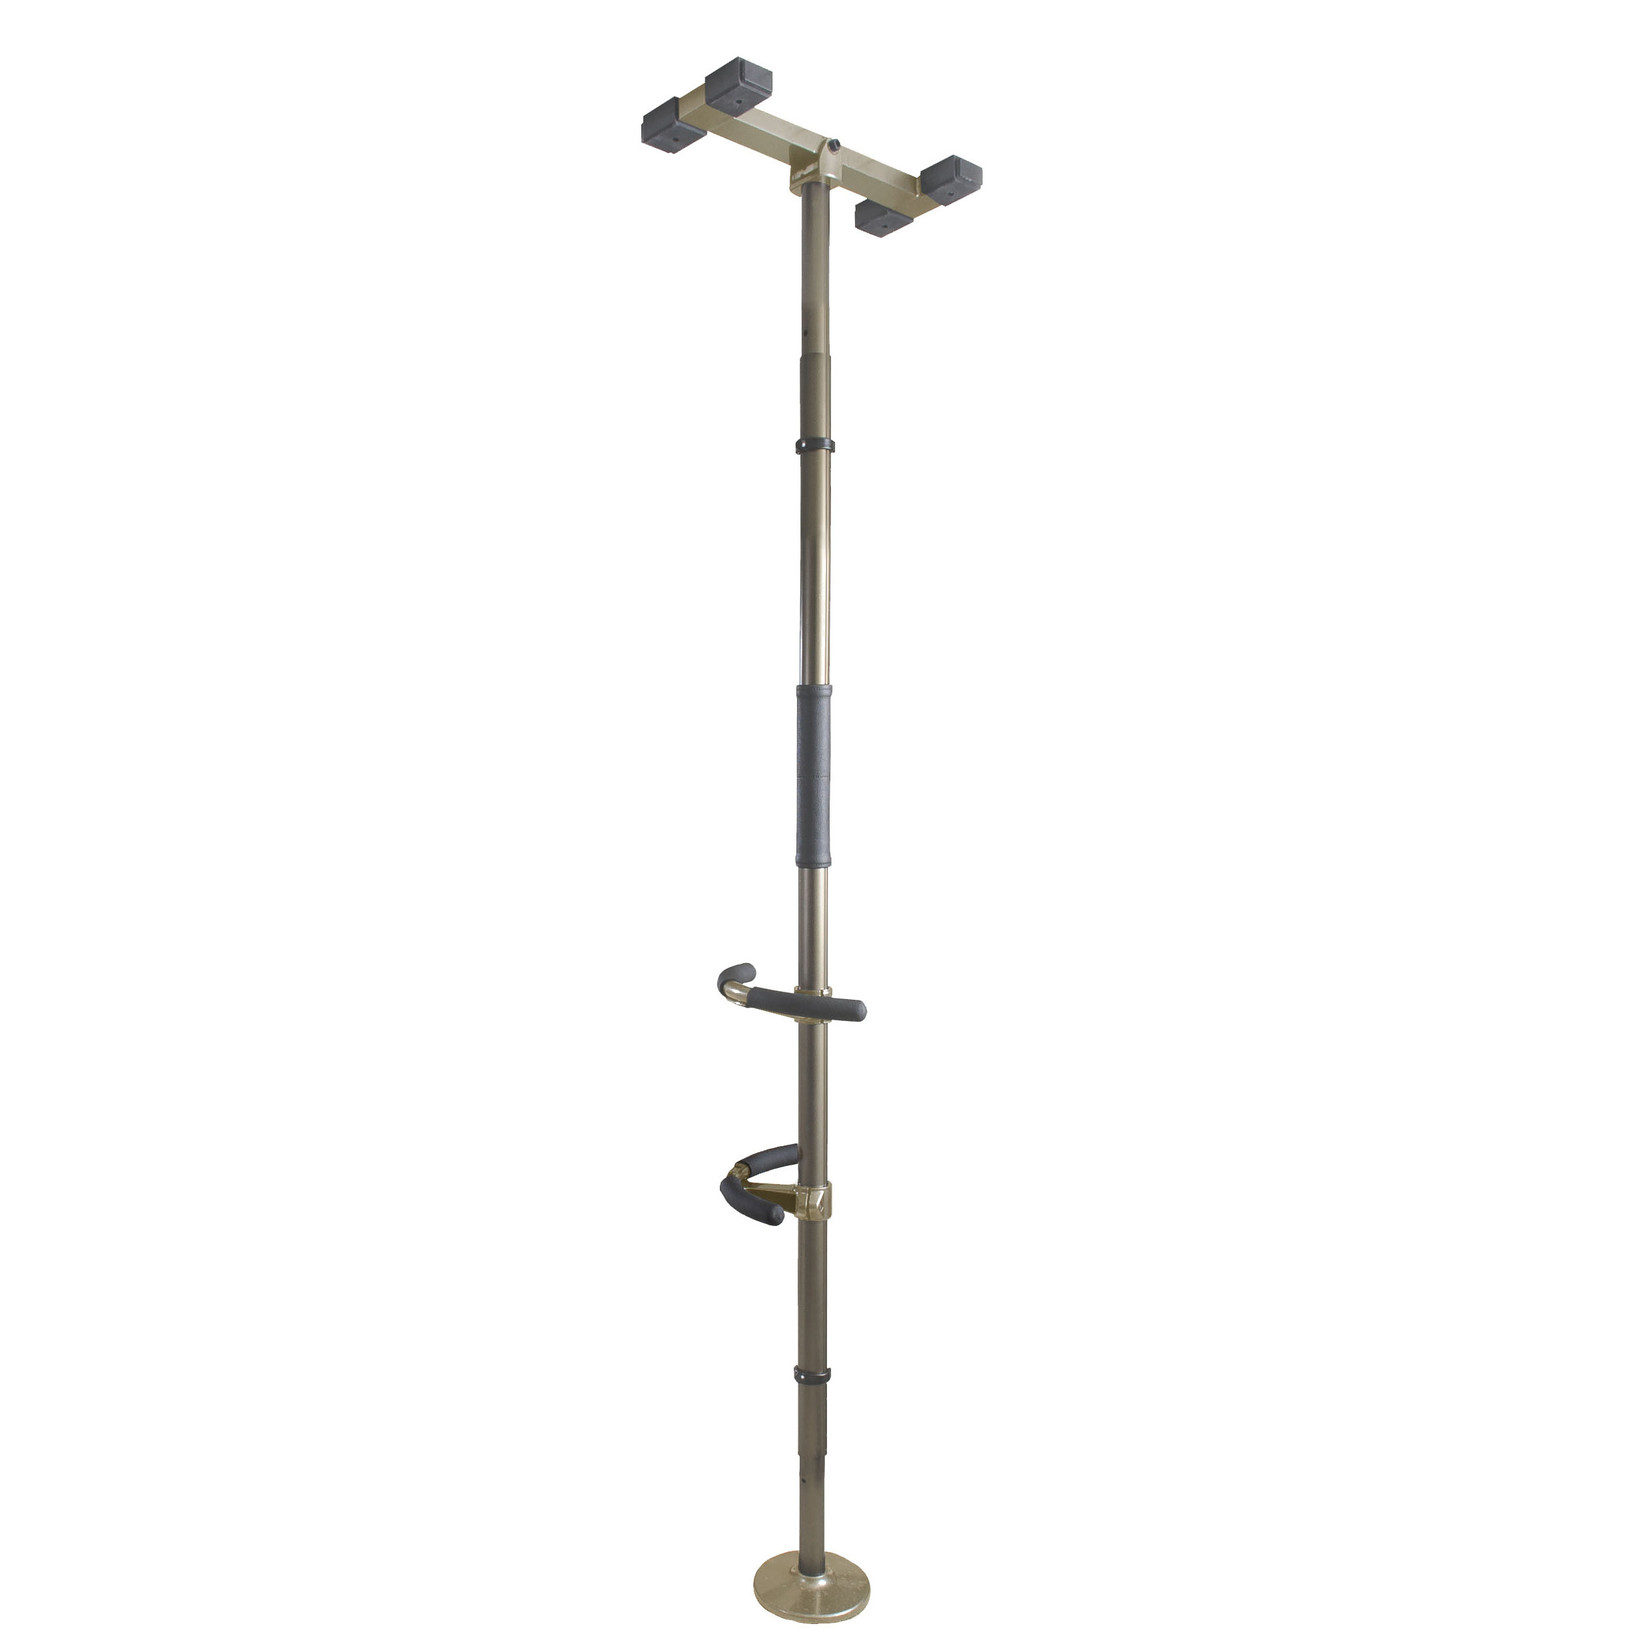 Signature Life Sure Stand Pole with Handles